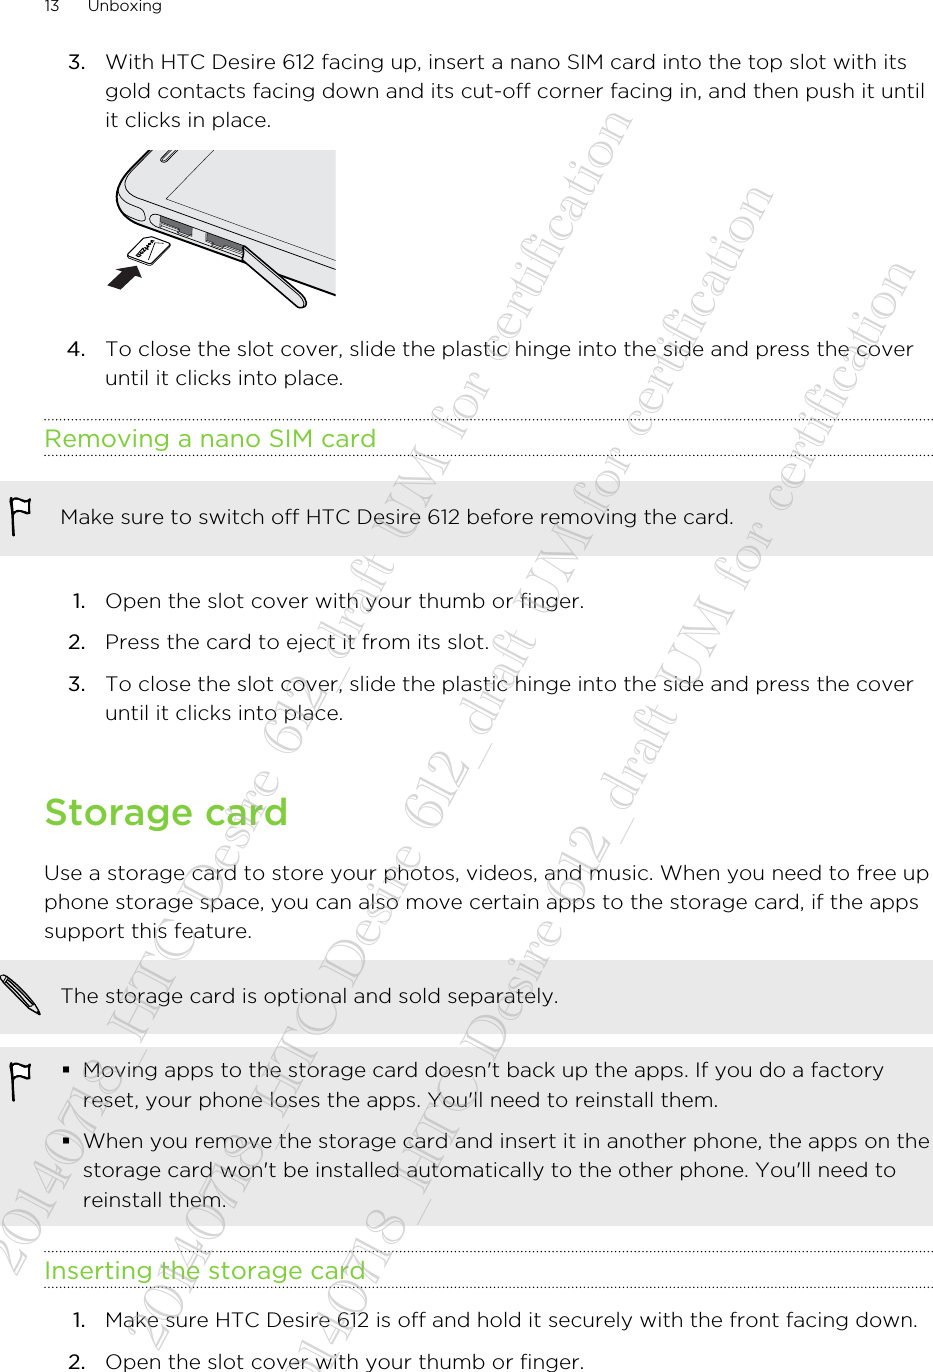 3. With HTC Desire 612 facing up, insert a nano SIM card into the top slot with itsgold contacts facing down and its cut-off corner facing in, and then push it untilit clicks in place. 4. To close the slot cover, slide the plastic hinge into the side and press the coveruntil it clicks into place.Removing a nano SIM cardMake sure to switch off HTC Desire 612 before removing the card.1. Open the slot cover with your thumb or finger.2. Press the card to eject it from its slot.3. To close the slot cover, slide the plastic hinge into the side and press the coveruntil it clicks into place.Storage cardUse a storage card to store your photos, videos, and music. When you need to free upphone storage space, you can also move certain apps to the storage card, if the appssupport this feature.The storage card is optional and sold separately.§Moving apps to the storage card doesn&apos;t back up the apps. If you do a factoryreset, your phone loses the apps. You&apos;ll need to reinstall them.§When you remove the storage card and insert it in another phone, the apps on thestorage card won&apos;t be installed automatically to the other phone. You&apos;ll need toreinstall them.Inserting the storage card1. Make sure HTC Desire 612 is off and hold it securely with the front facing down.2. Open the slot cover with your thumb or finger.13 Unboxing20140718_HTC Desire 612_draft UM for certification  20140718_HTC Desire 612_draft UM for certification  20140718_HTC Desire 612_draft UM for certification